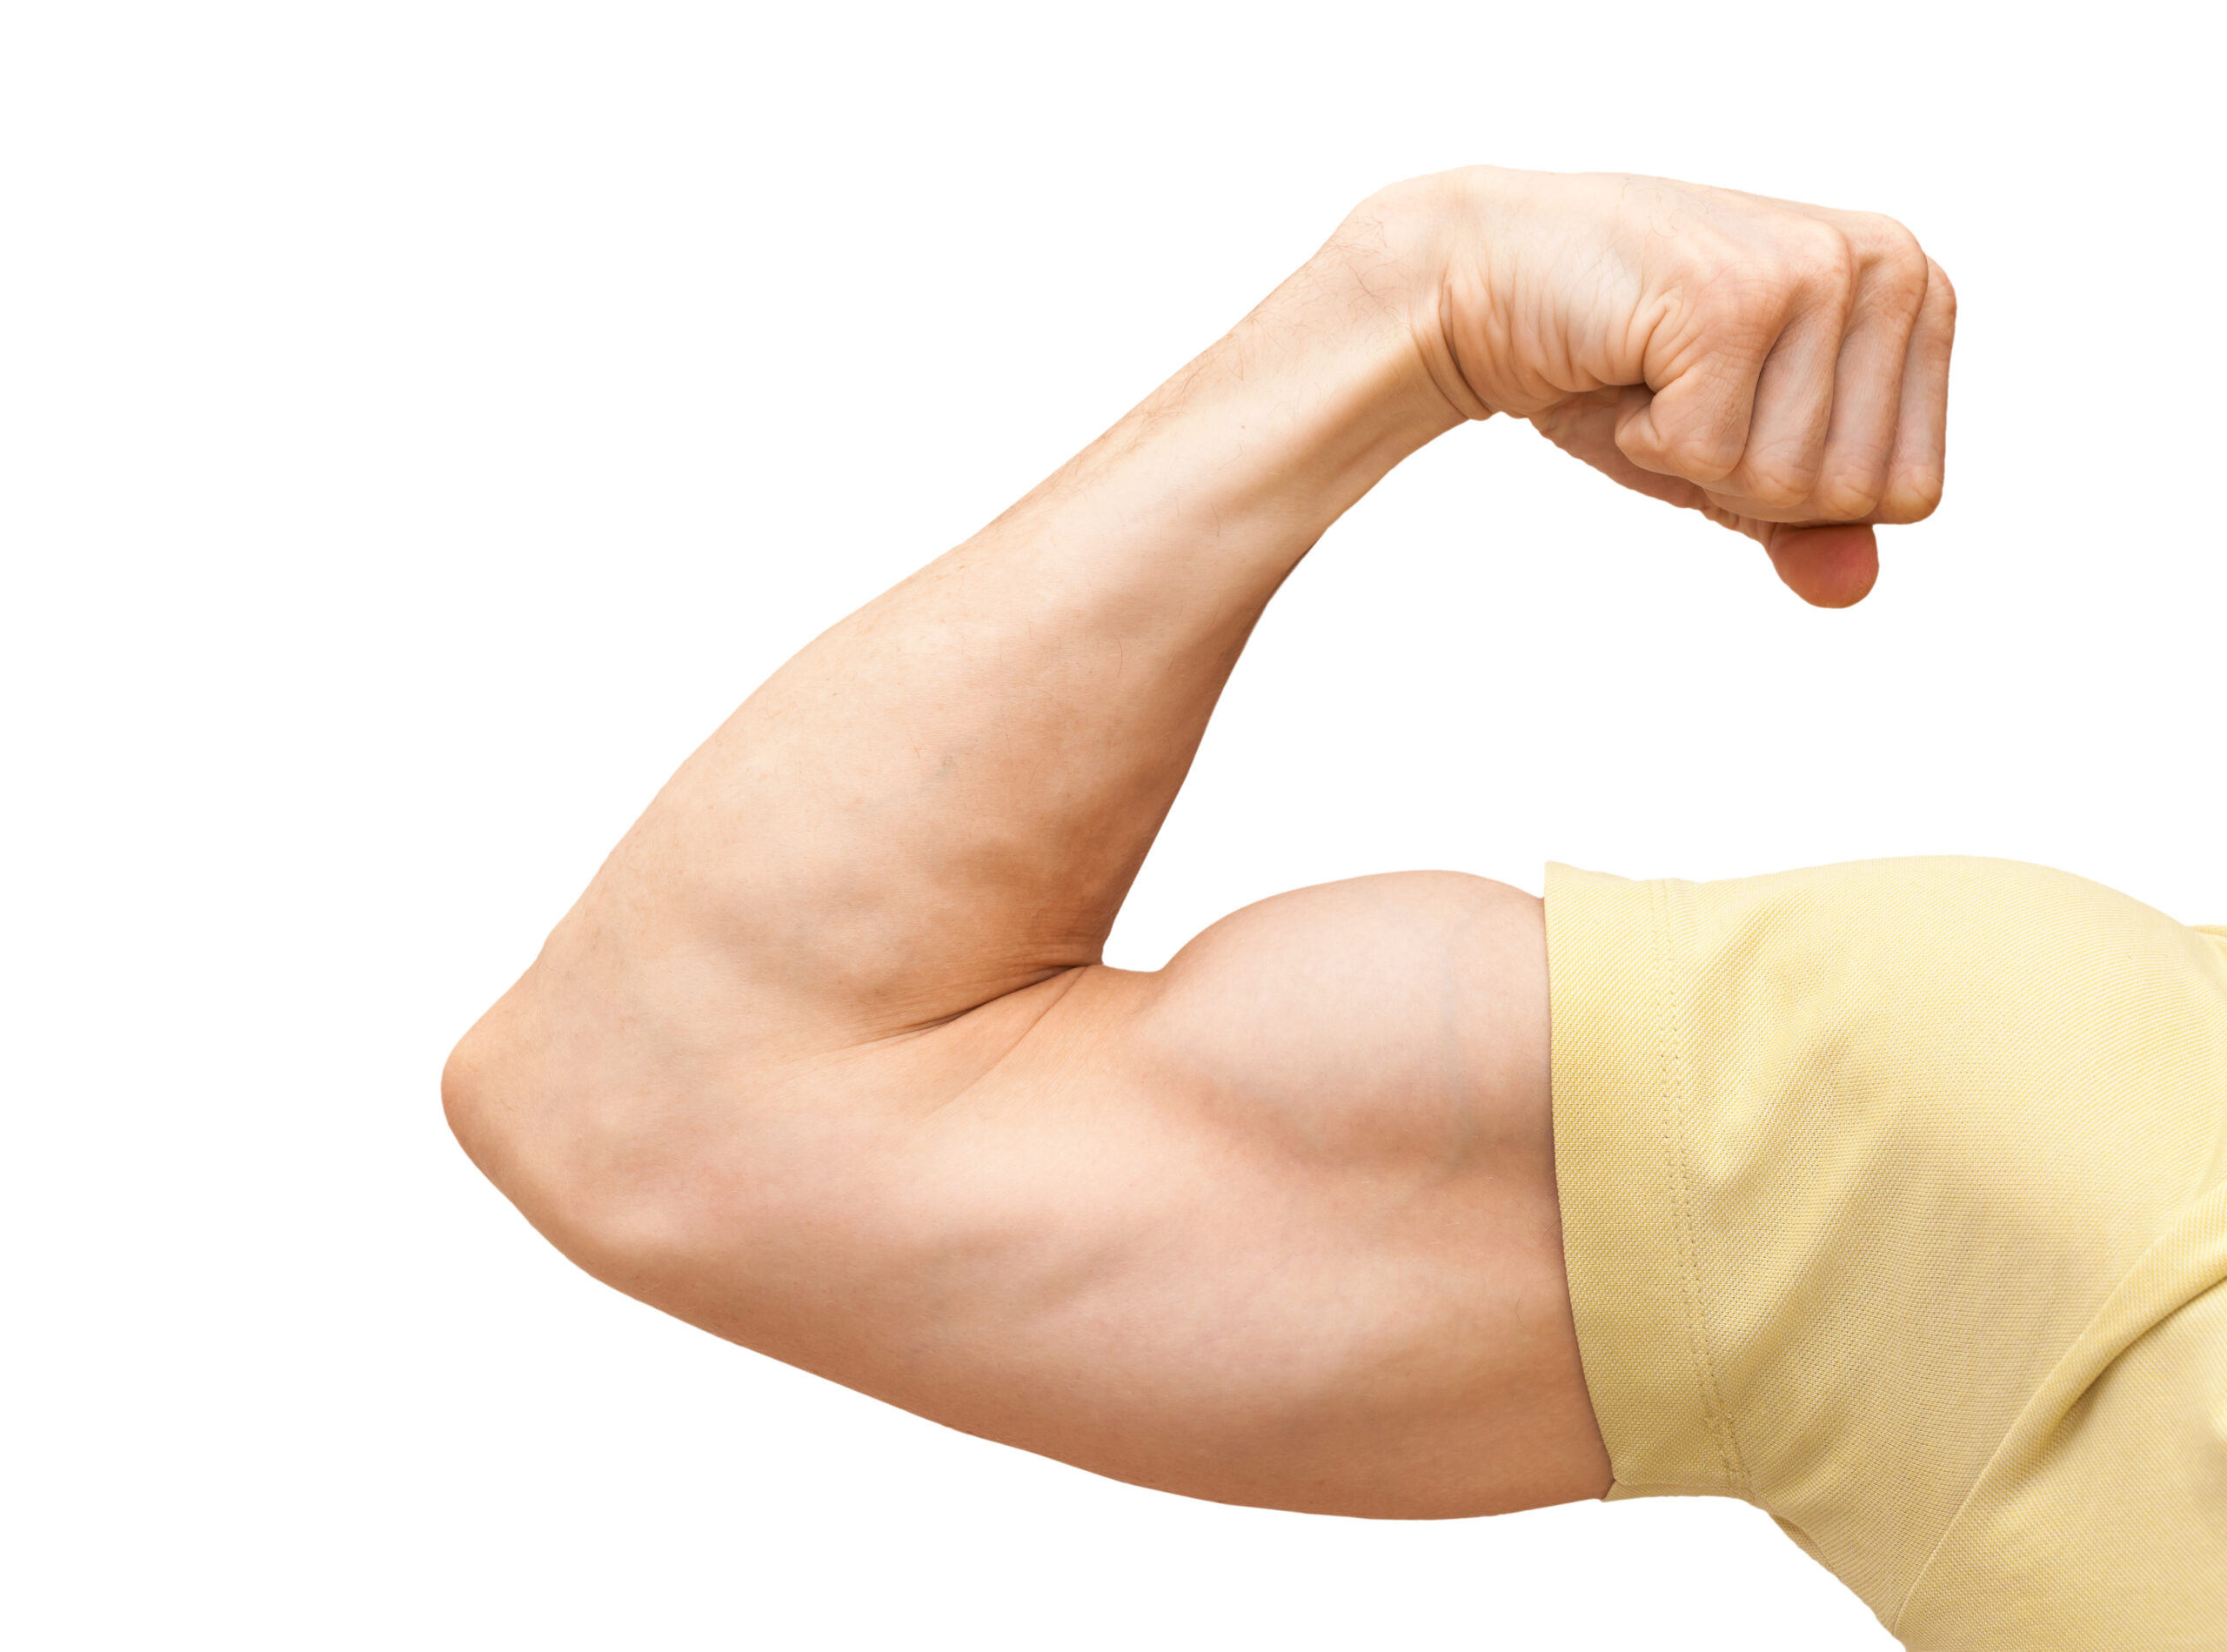 Strong male arm with yellow sleeve shows biceps